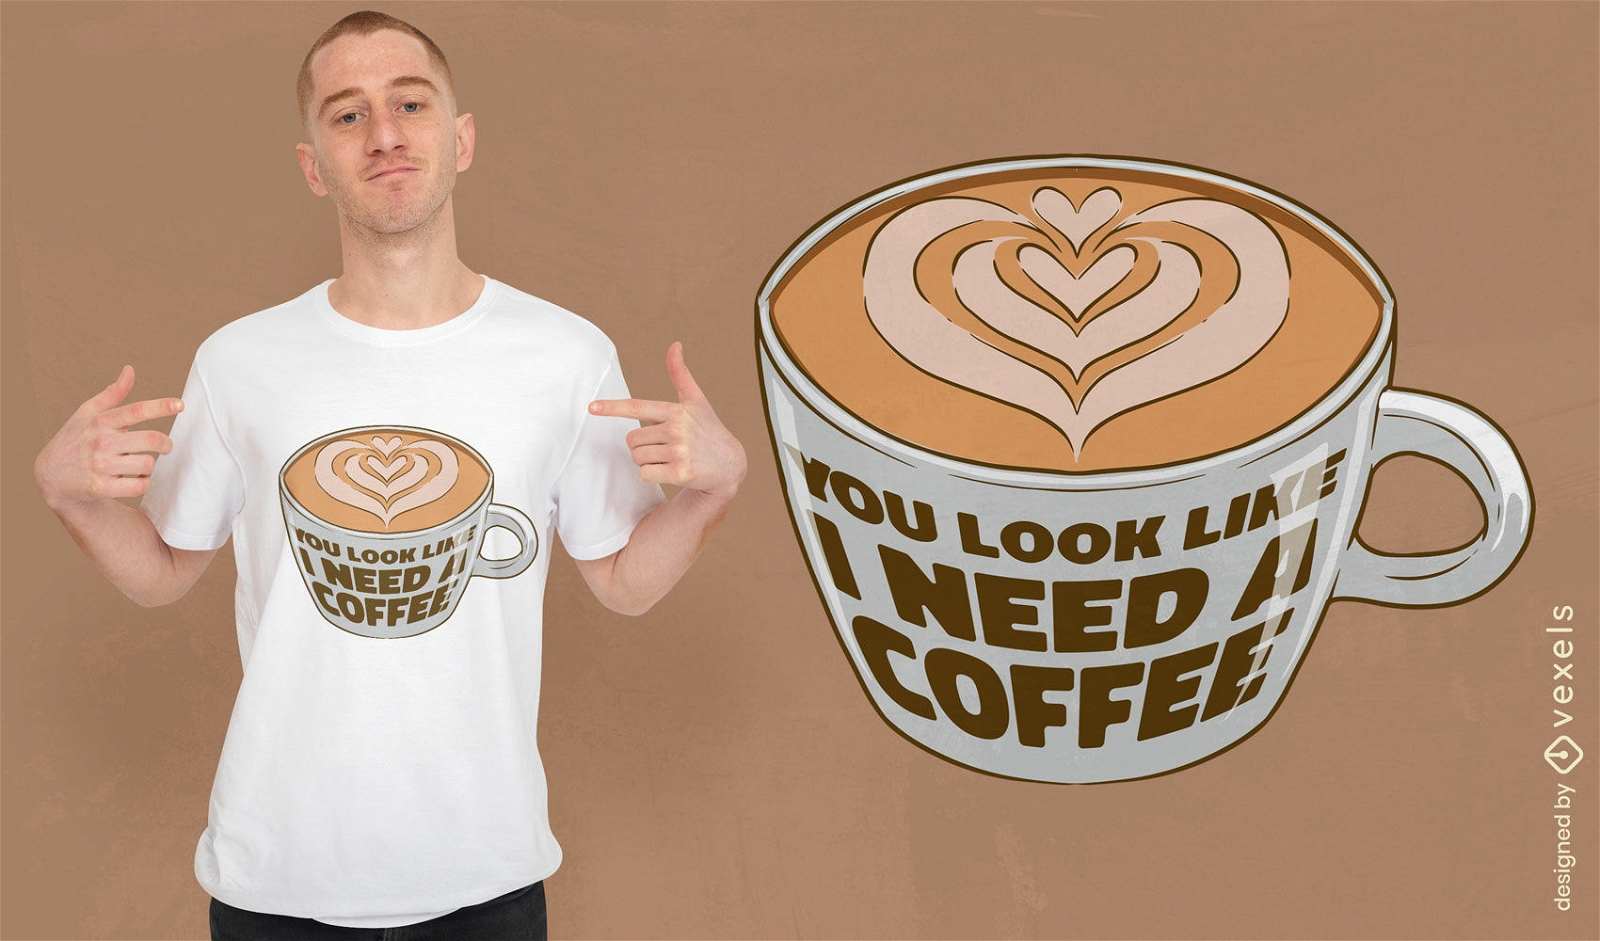 Funny coffee cup quote t-shirt design